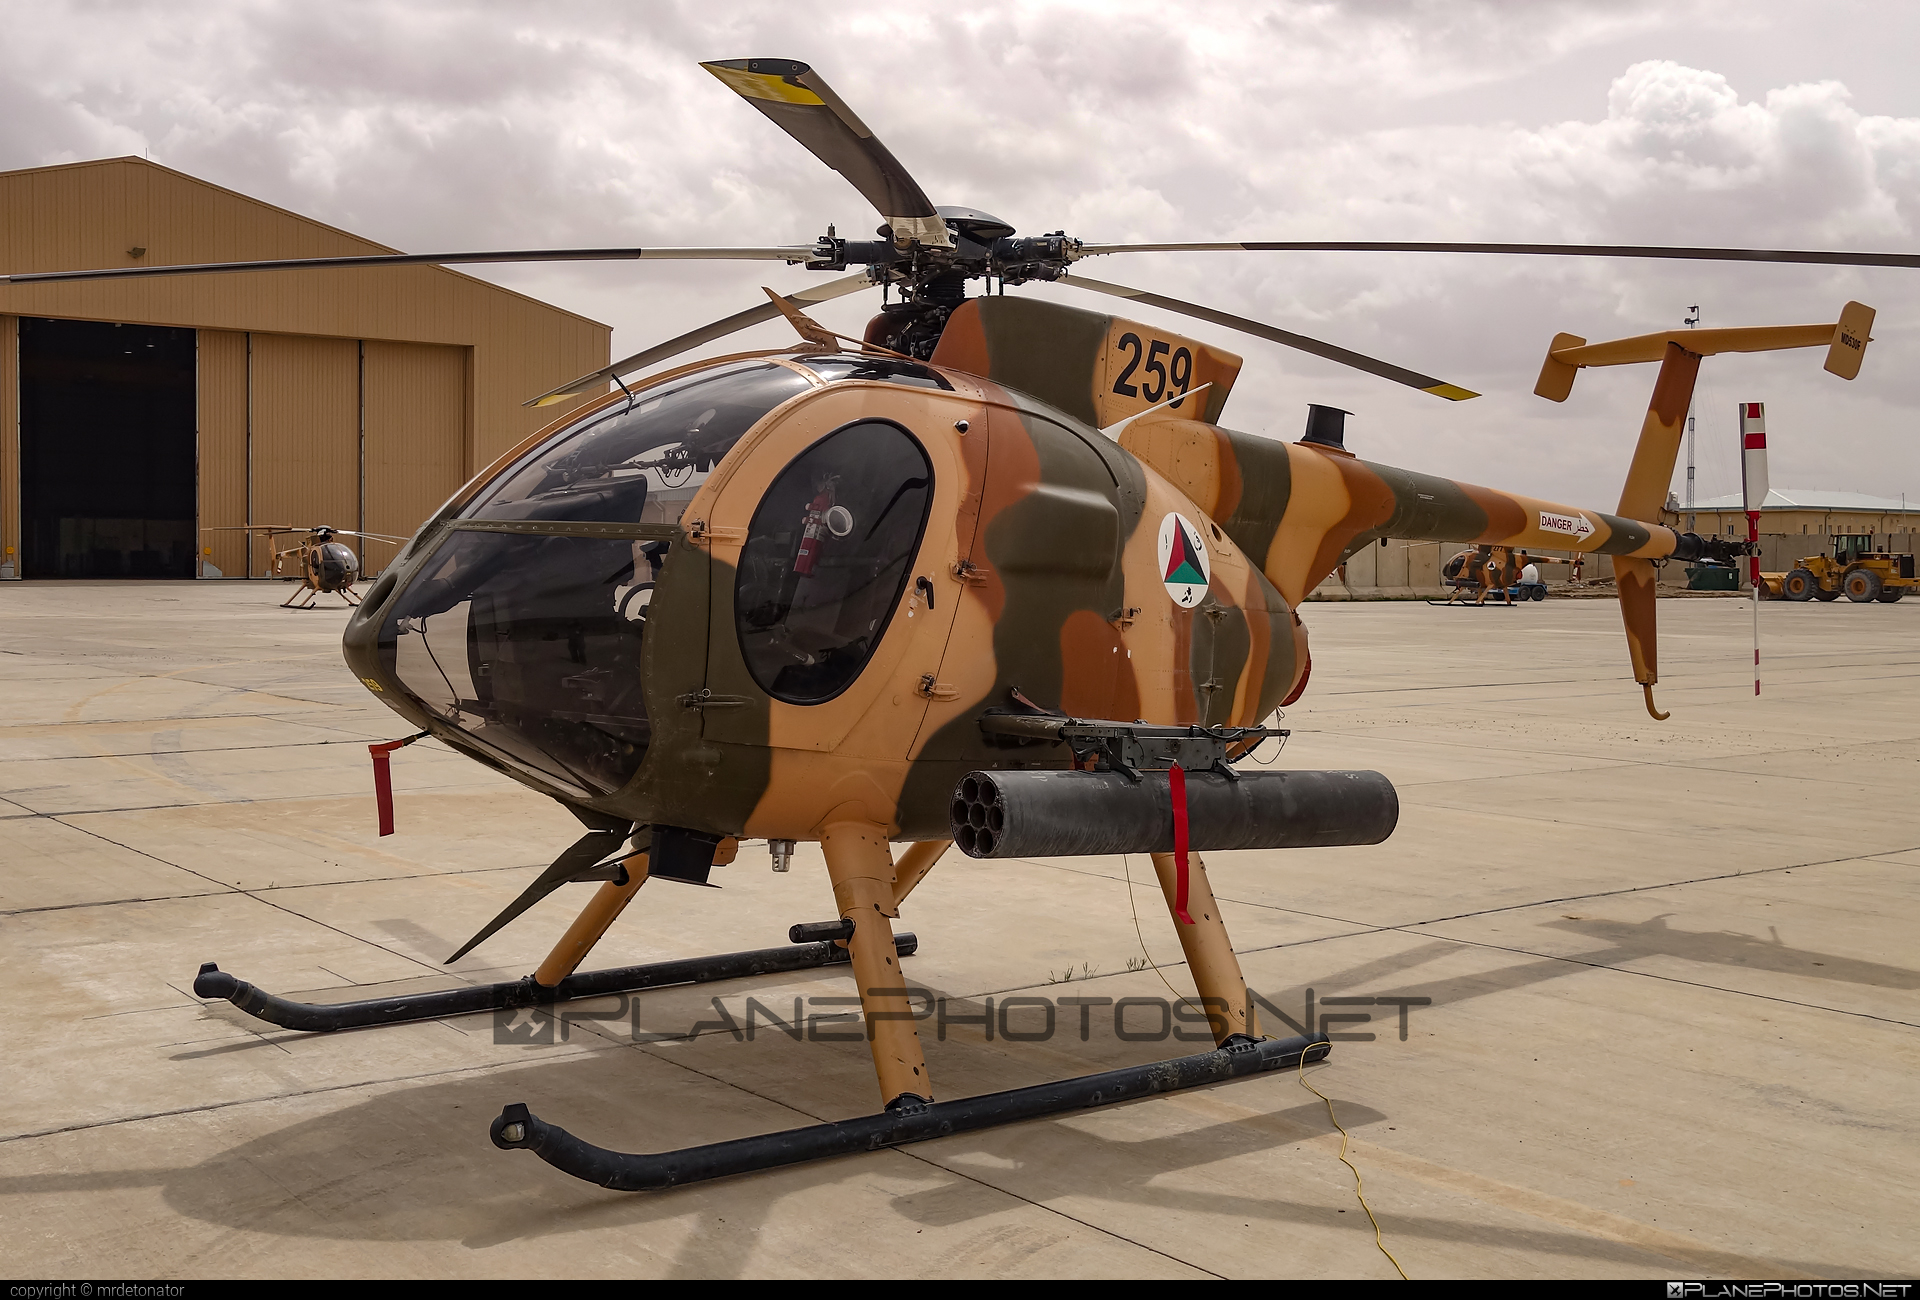 MD Helicopters MD-530F - 259 operated by Afghan Air Force #afghanairforce #md530f #mdhelicopters #mdhelicopters500 #mdhelicoptersmd530f